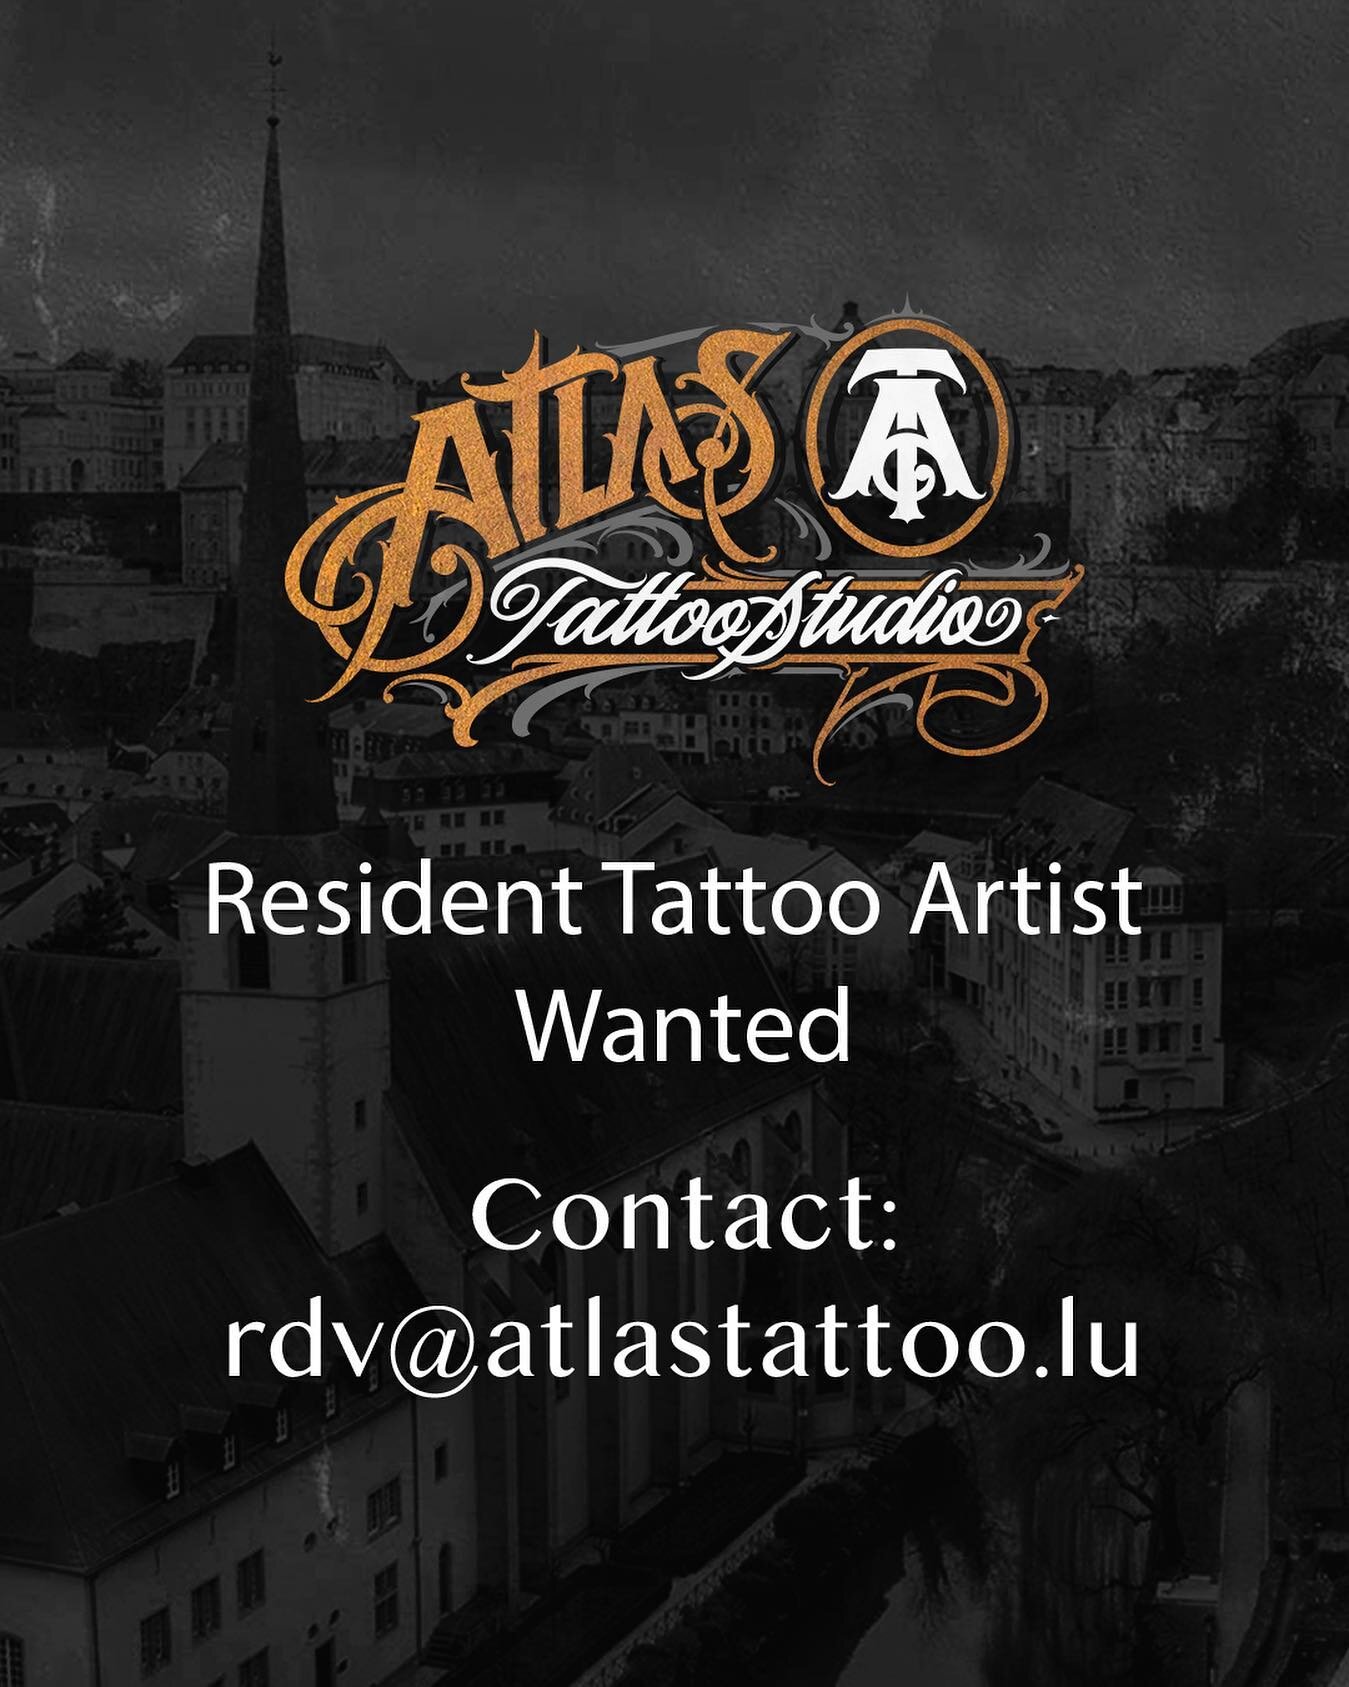 ‼️Resident Tattoo Artist Wanted ‼️

We are searching a new experienced tattoo artist to join our team as resident! If you are interested send us a DM or an e-mail at rdv@atlastattoo.lu with your portfolio. 

❗️Experienced tattoo artist ❗️